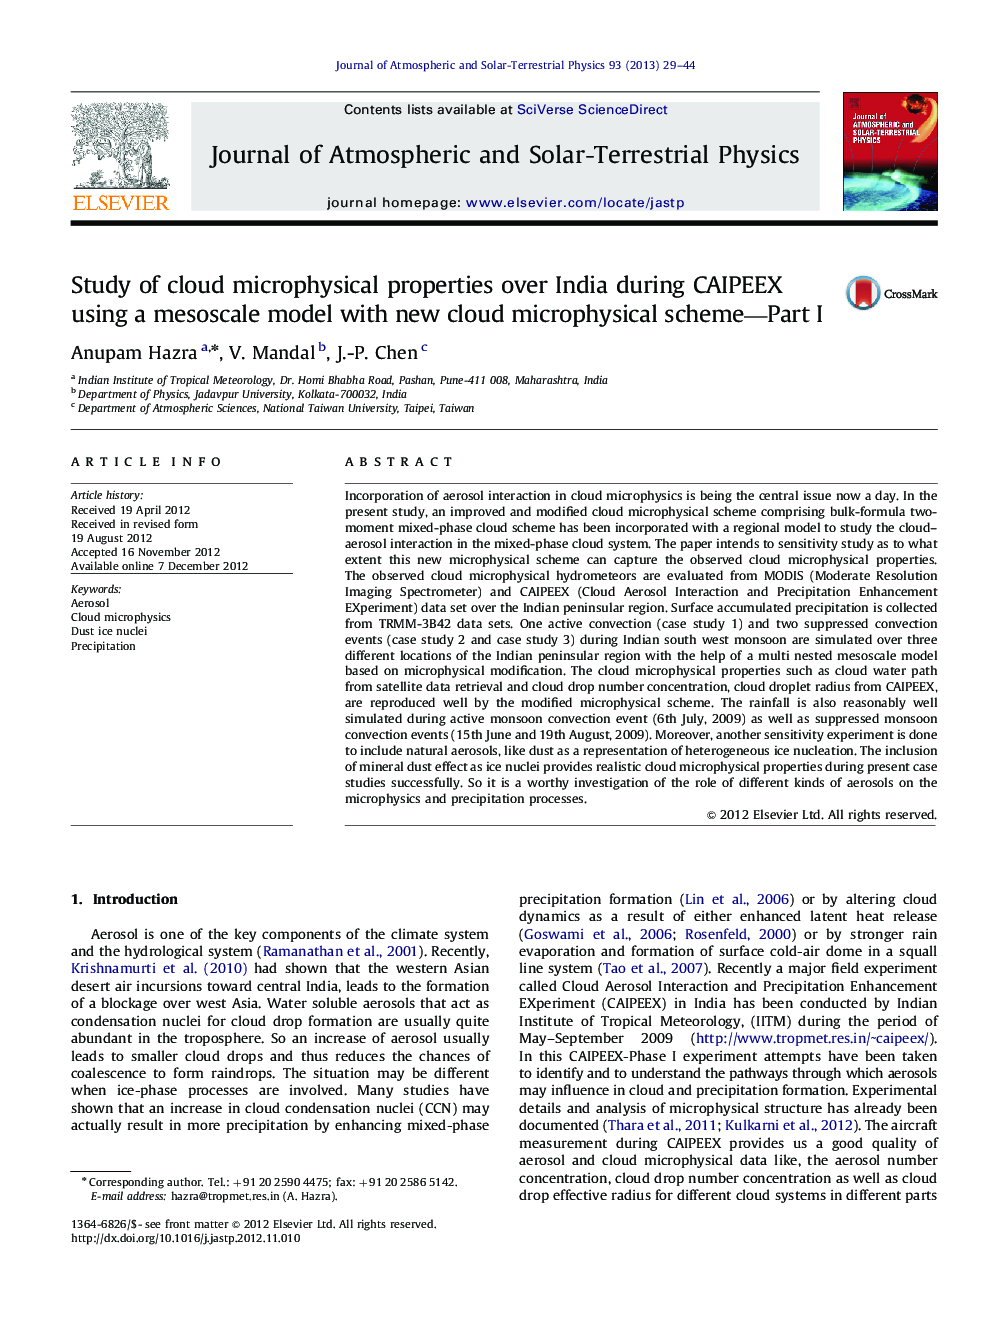 Study of cloud microphysical properties over India during CAIPEEX using a mesoscale model with new cloud microphysical scheme-Part I